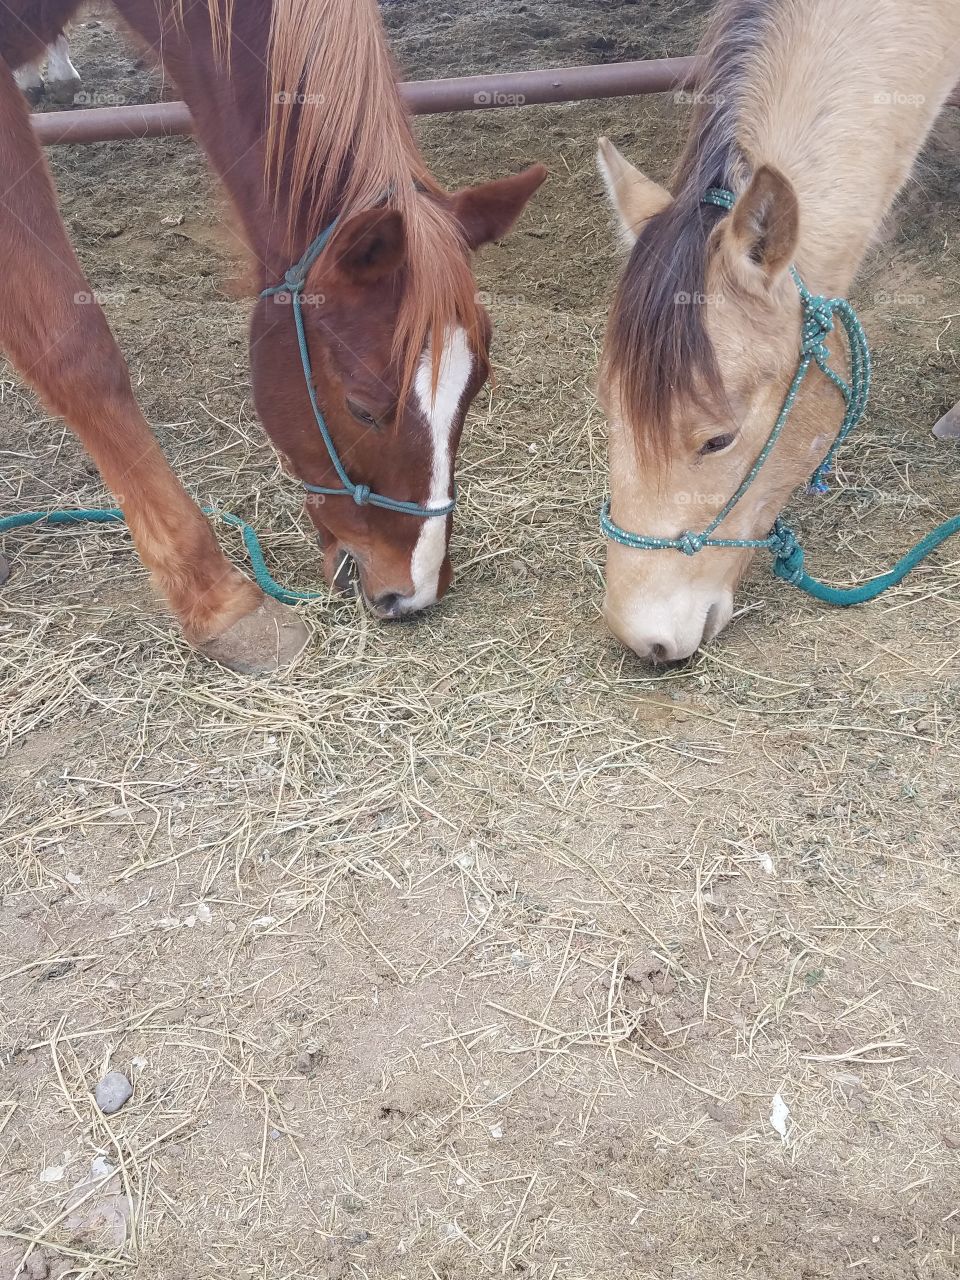 Two Horses eating